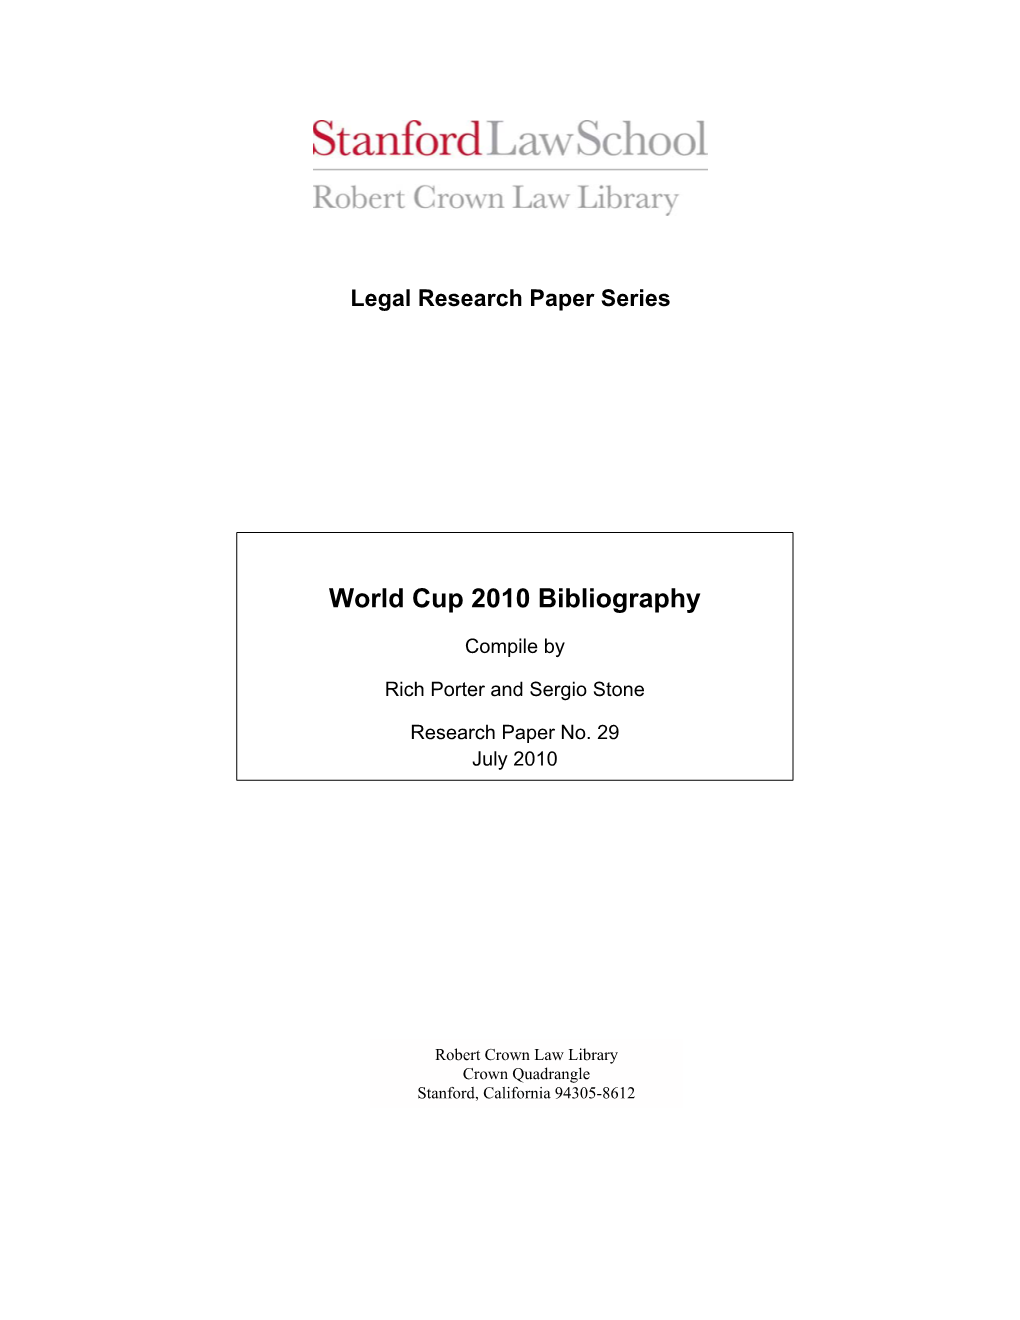 World Cup 2010 Bibliography